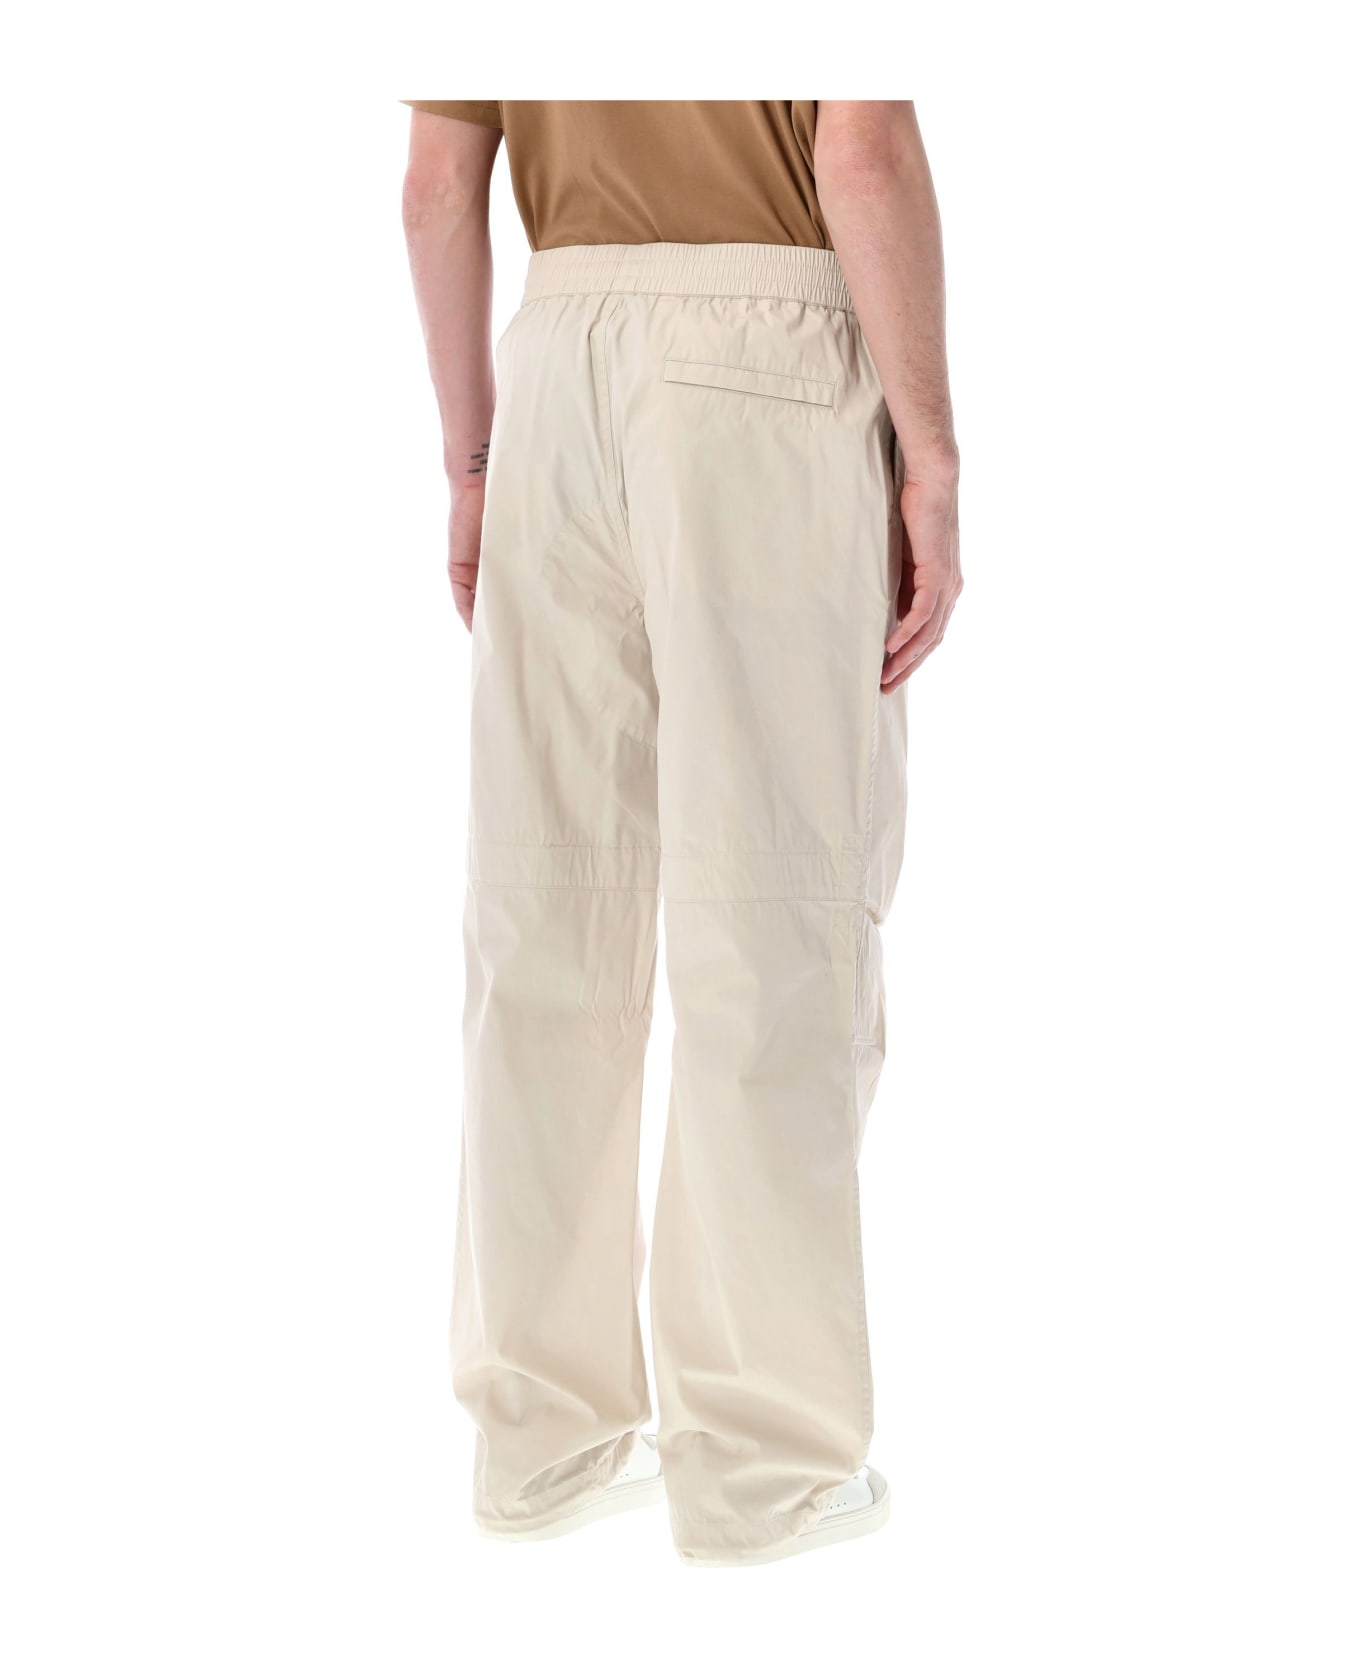 Burberry London Cargo Trousers - WHEAT ボトムス